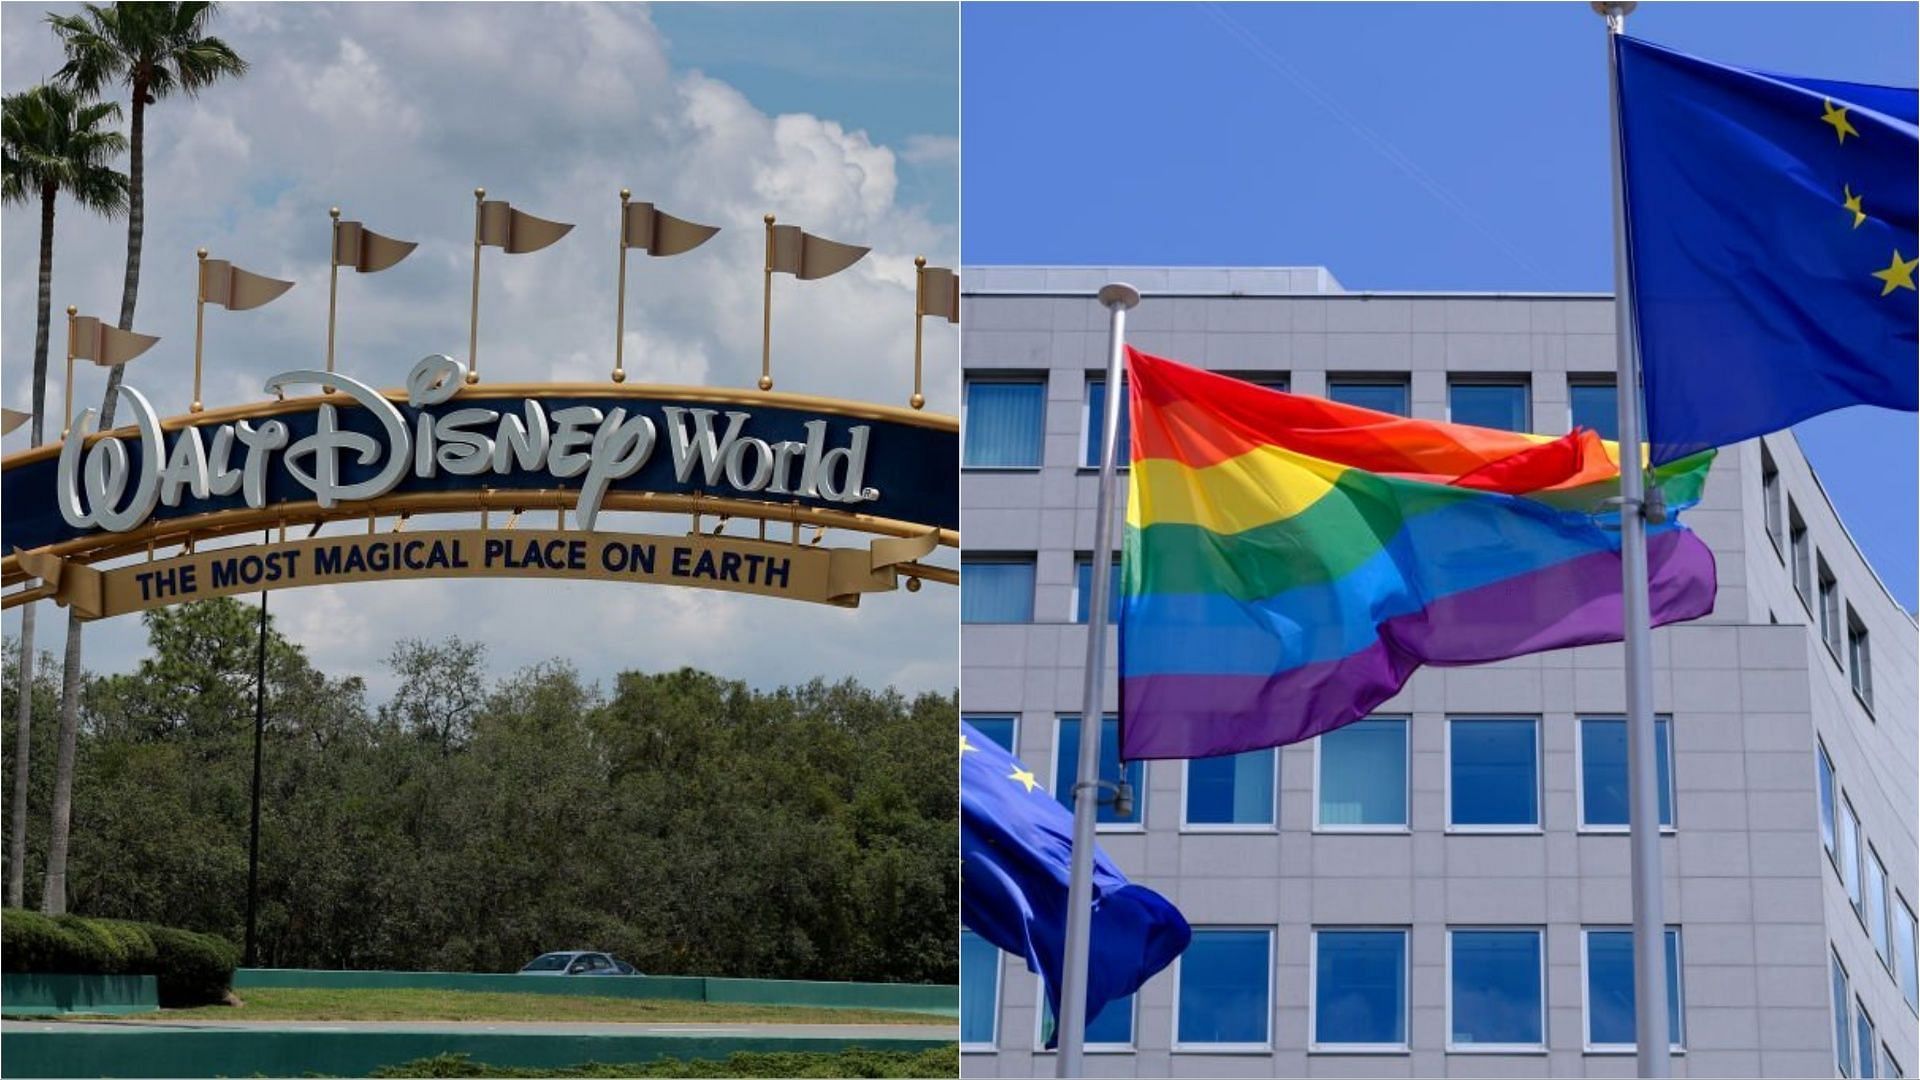 Disney World is reportedly replacing American flags with Pride flags (Images via Joe Raedle and Thierry Monasse/Getty Images)